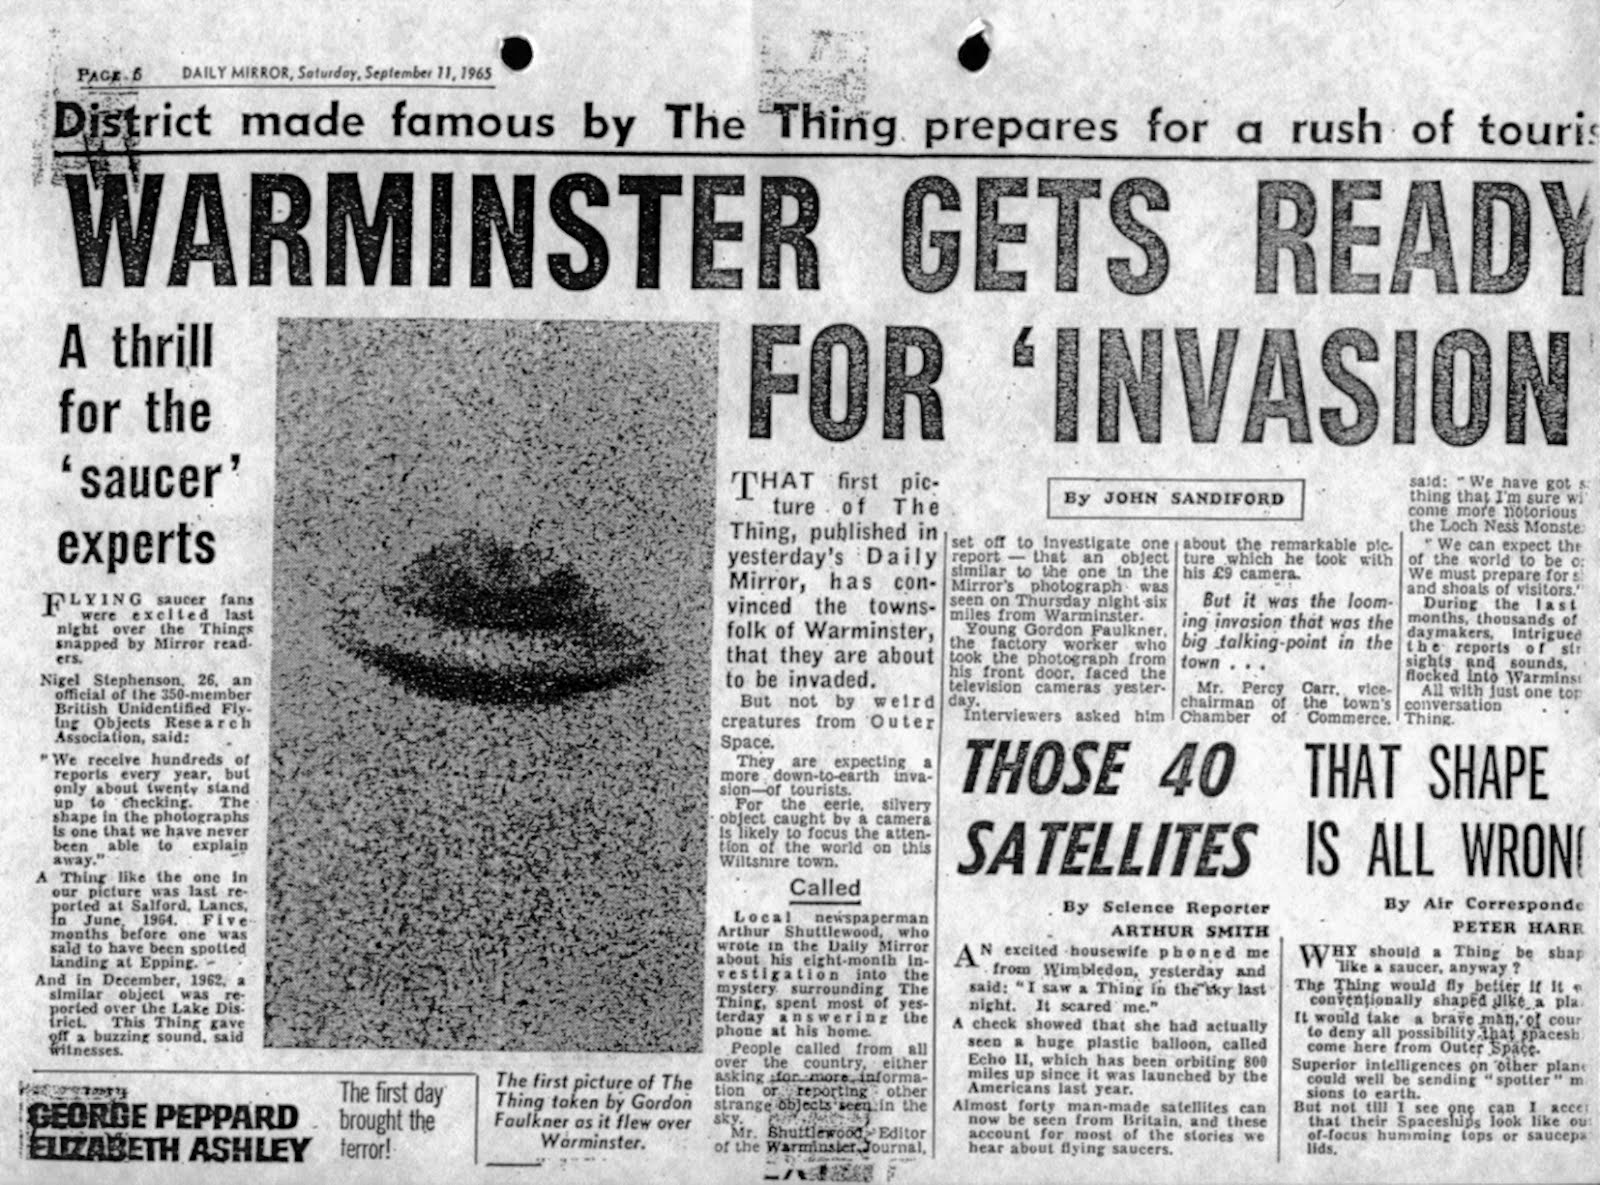 Daily Mirror 11.9.65